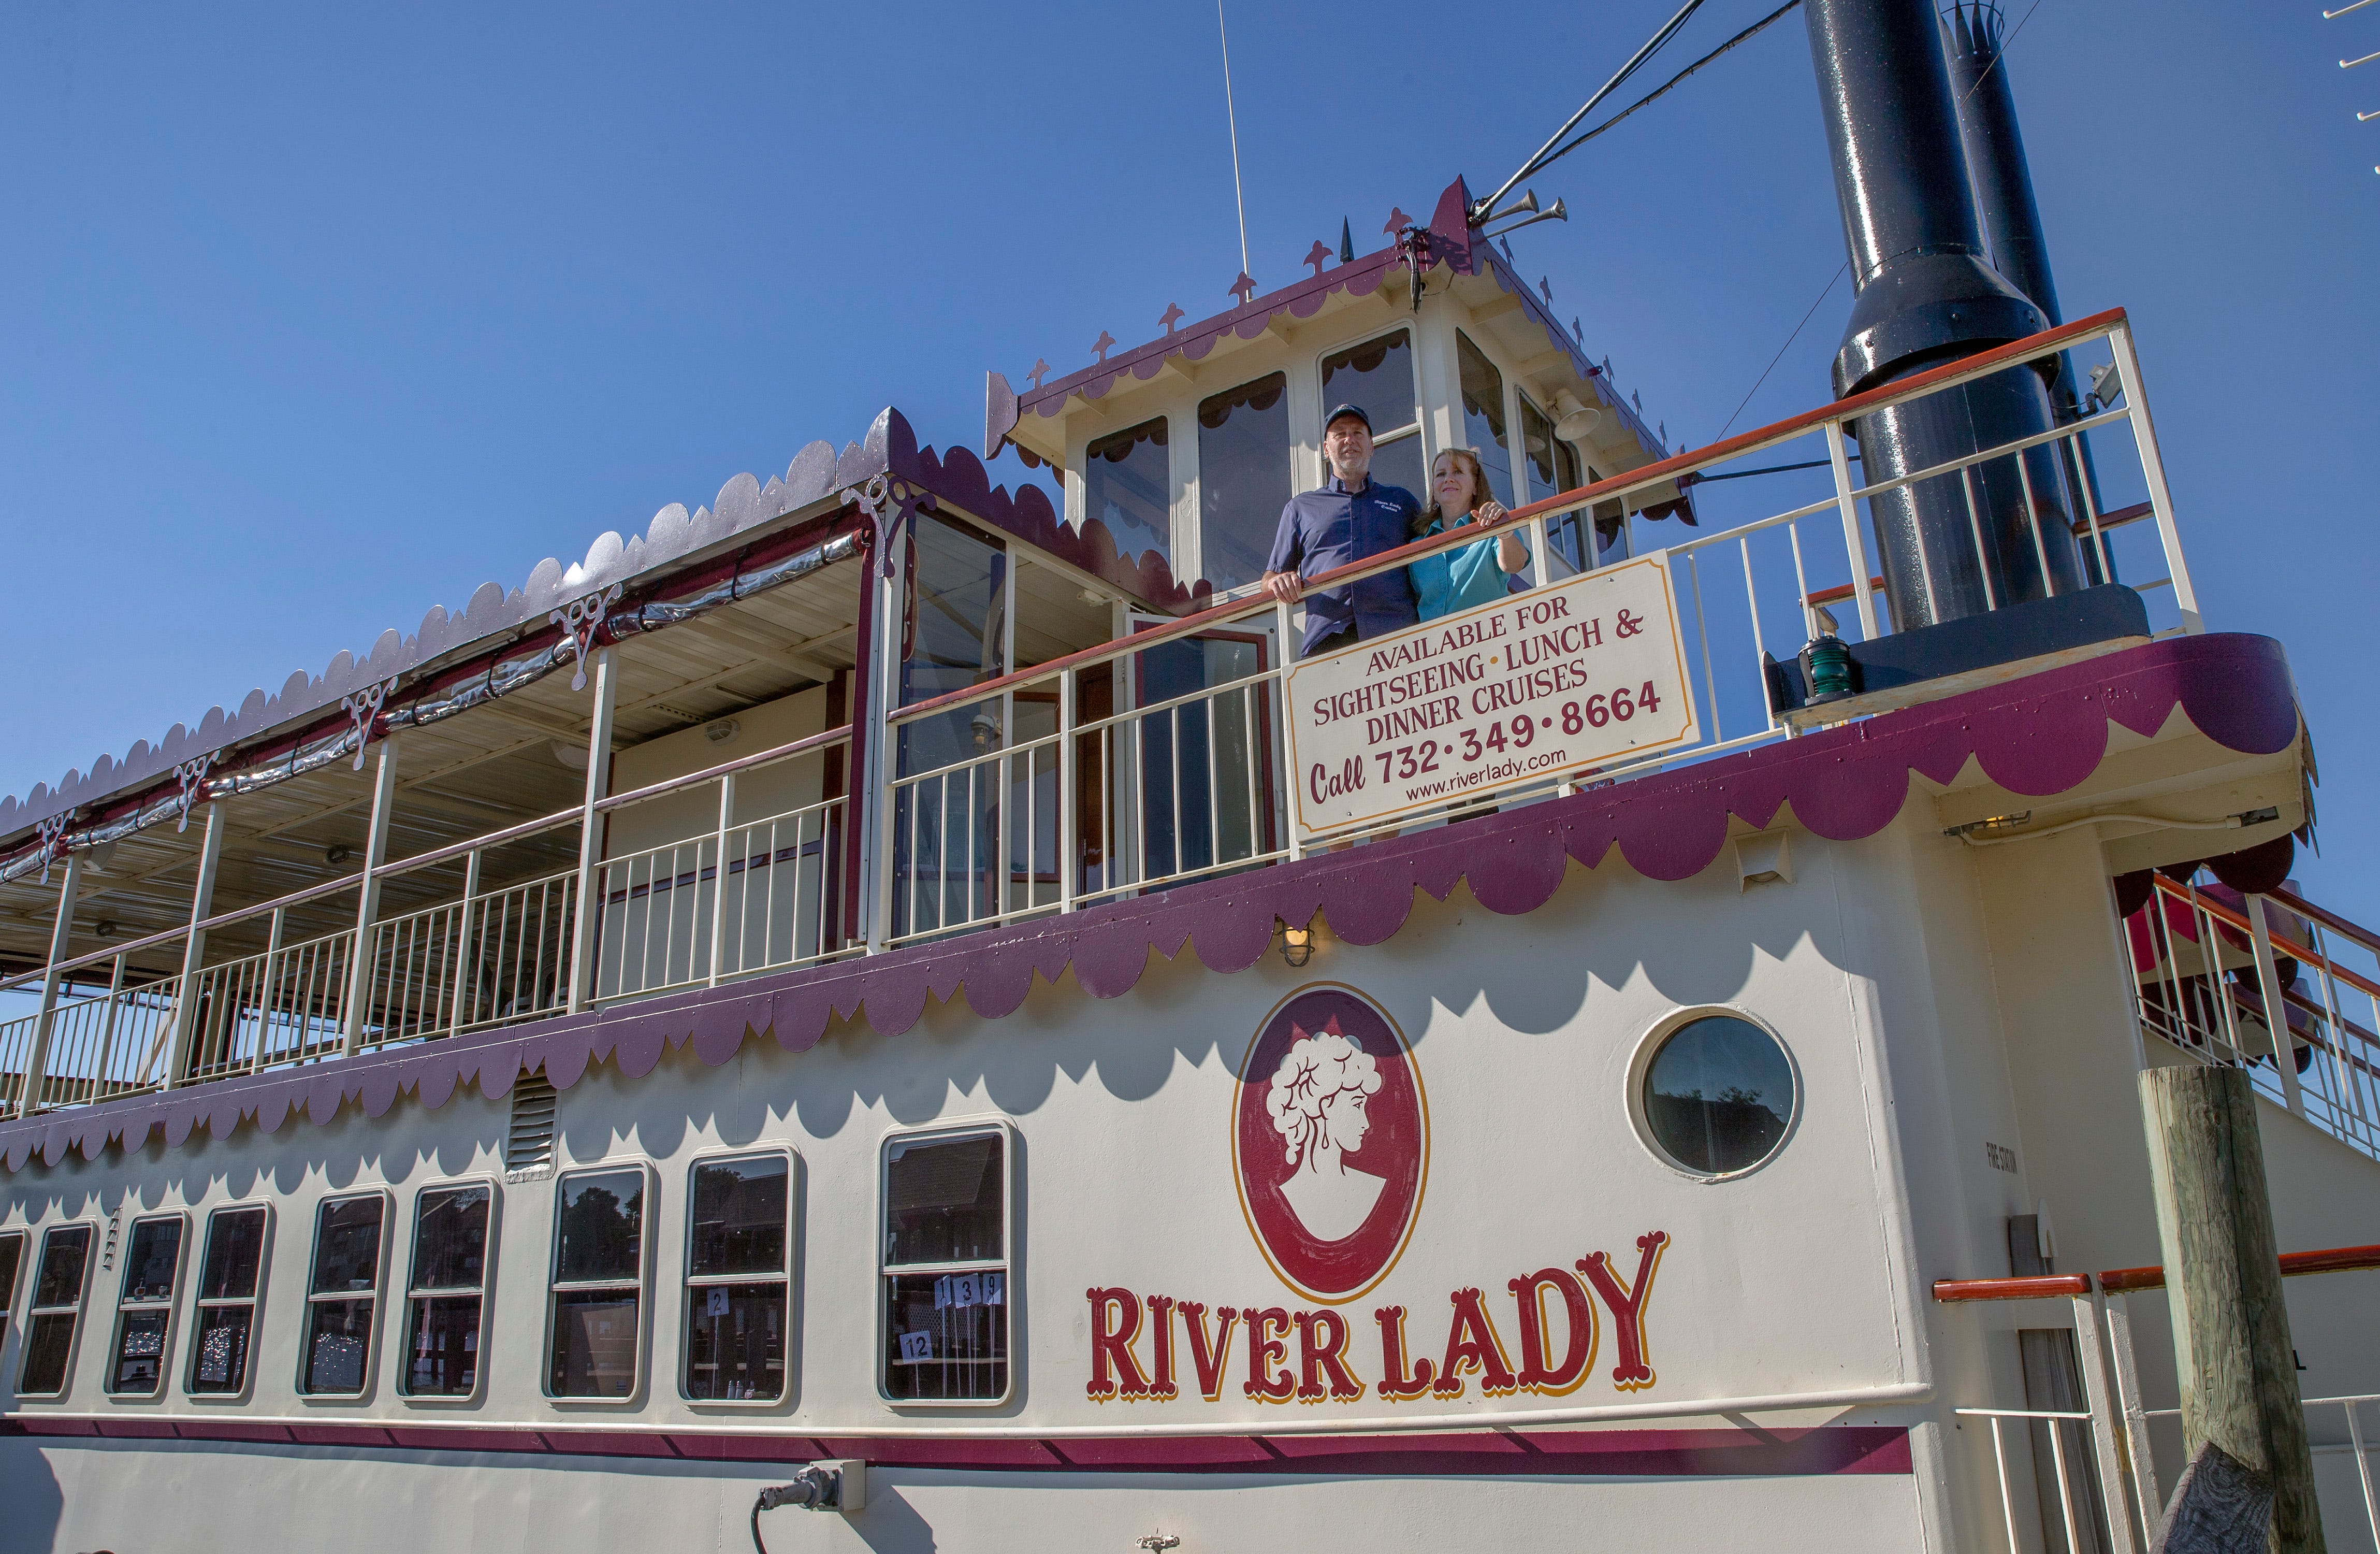 river lady cruise nj for Sale,Up To OFF 62%